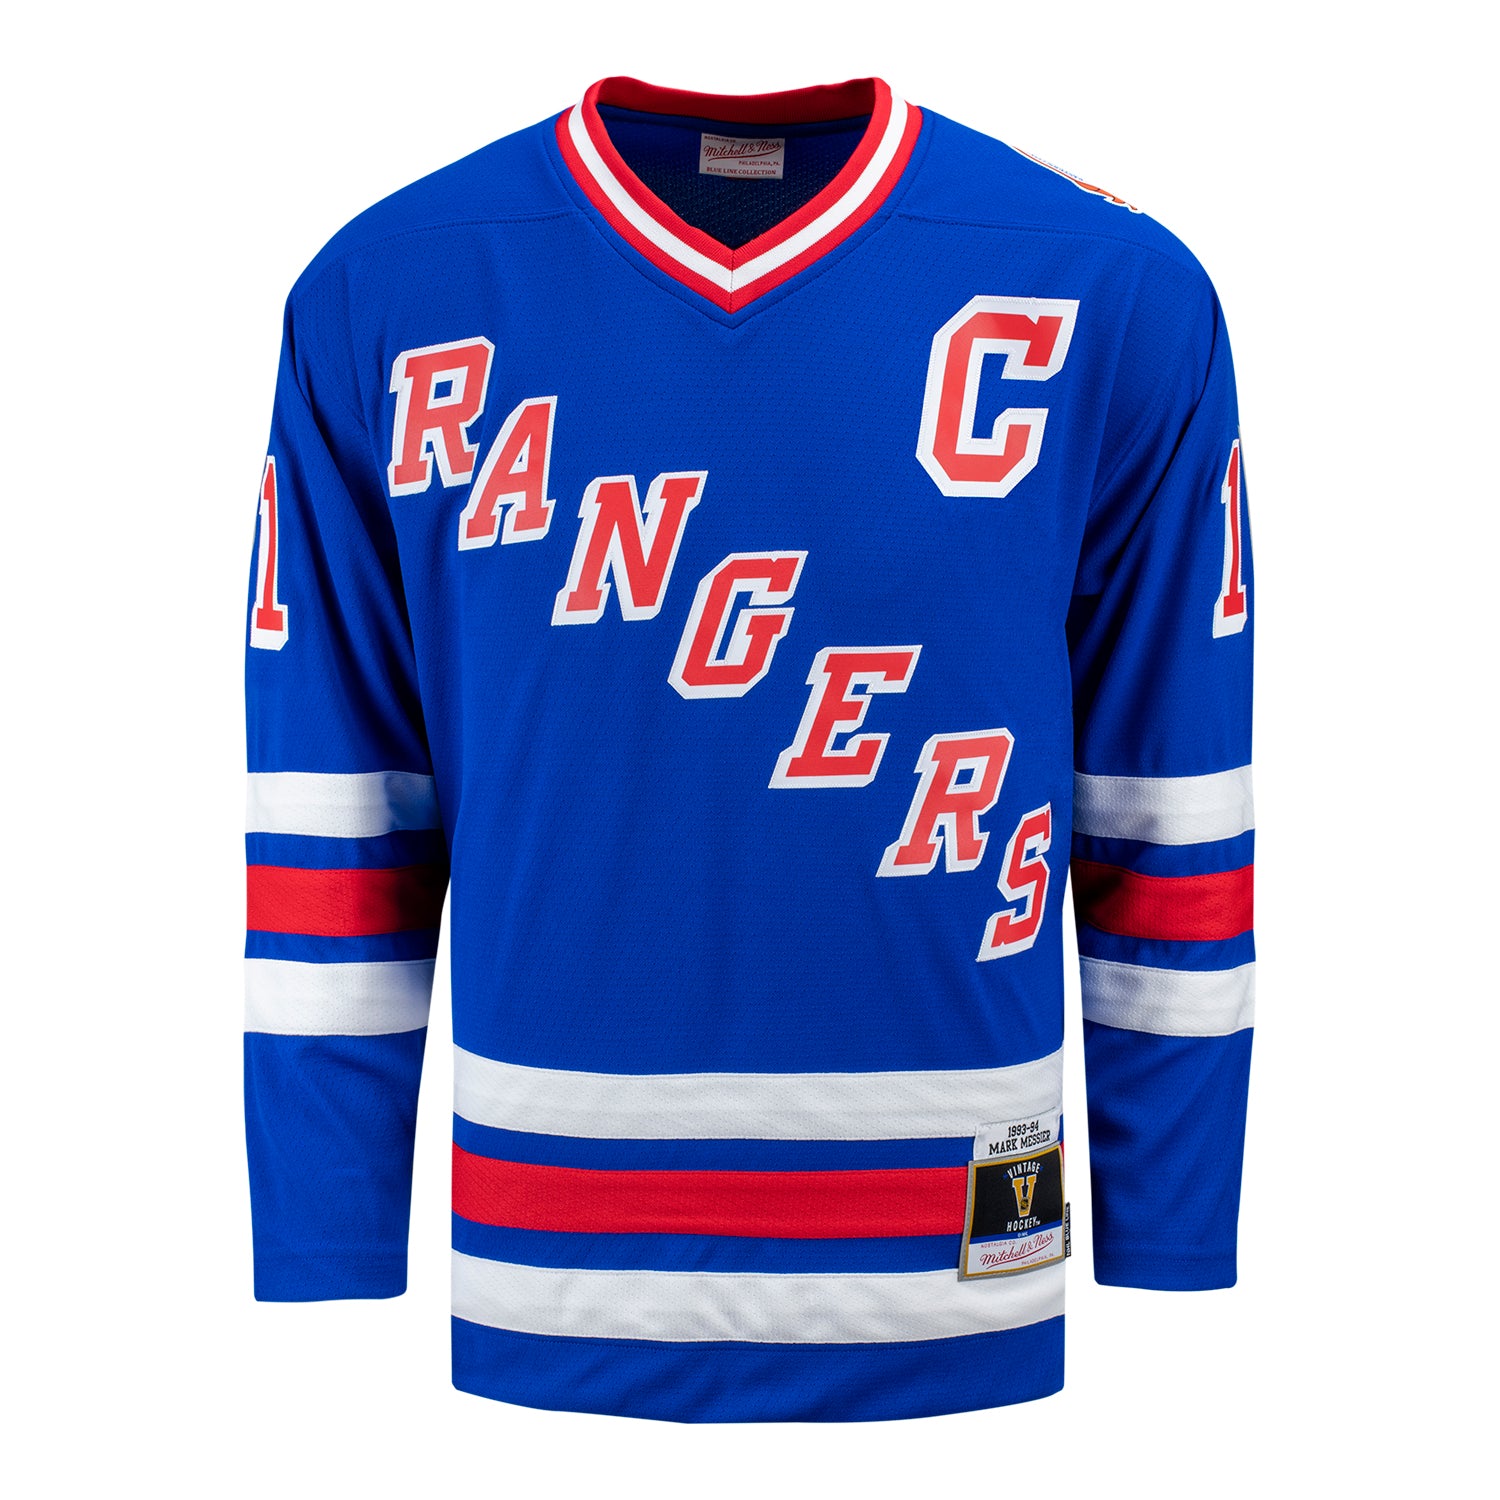 Messier's clutch moments jersey